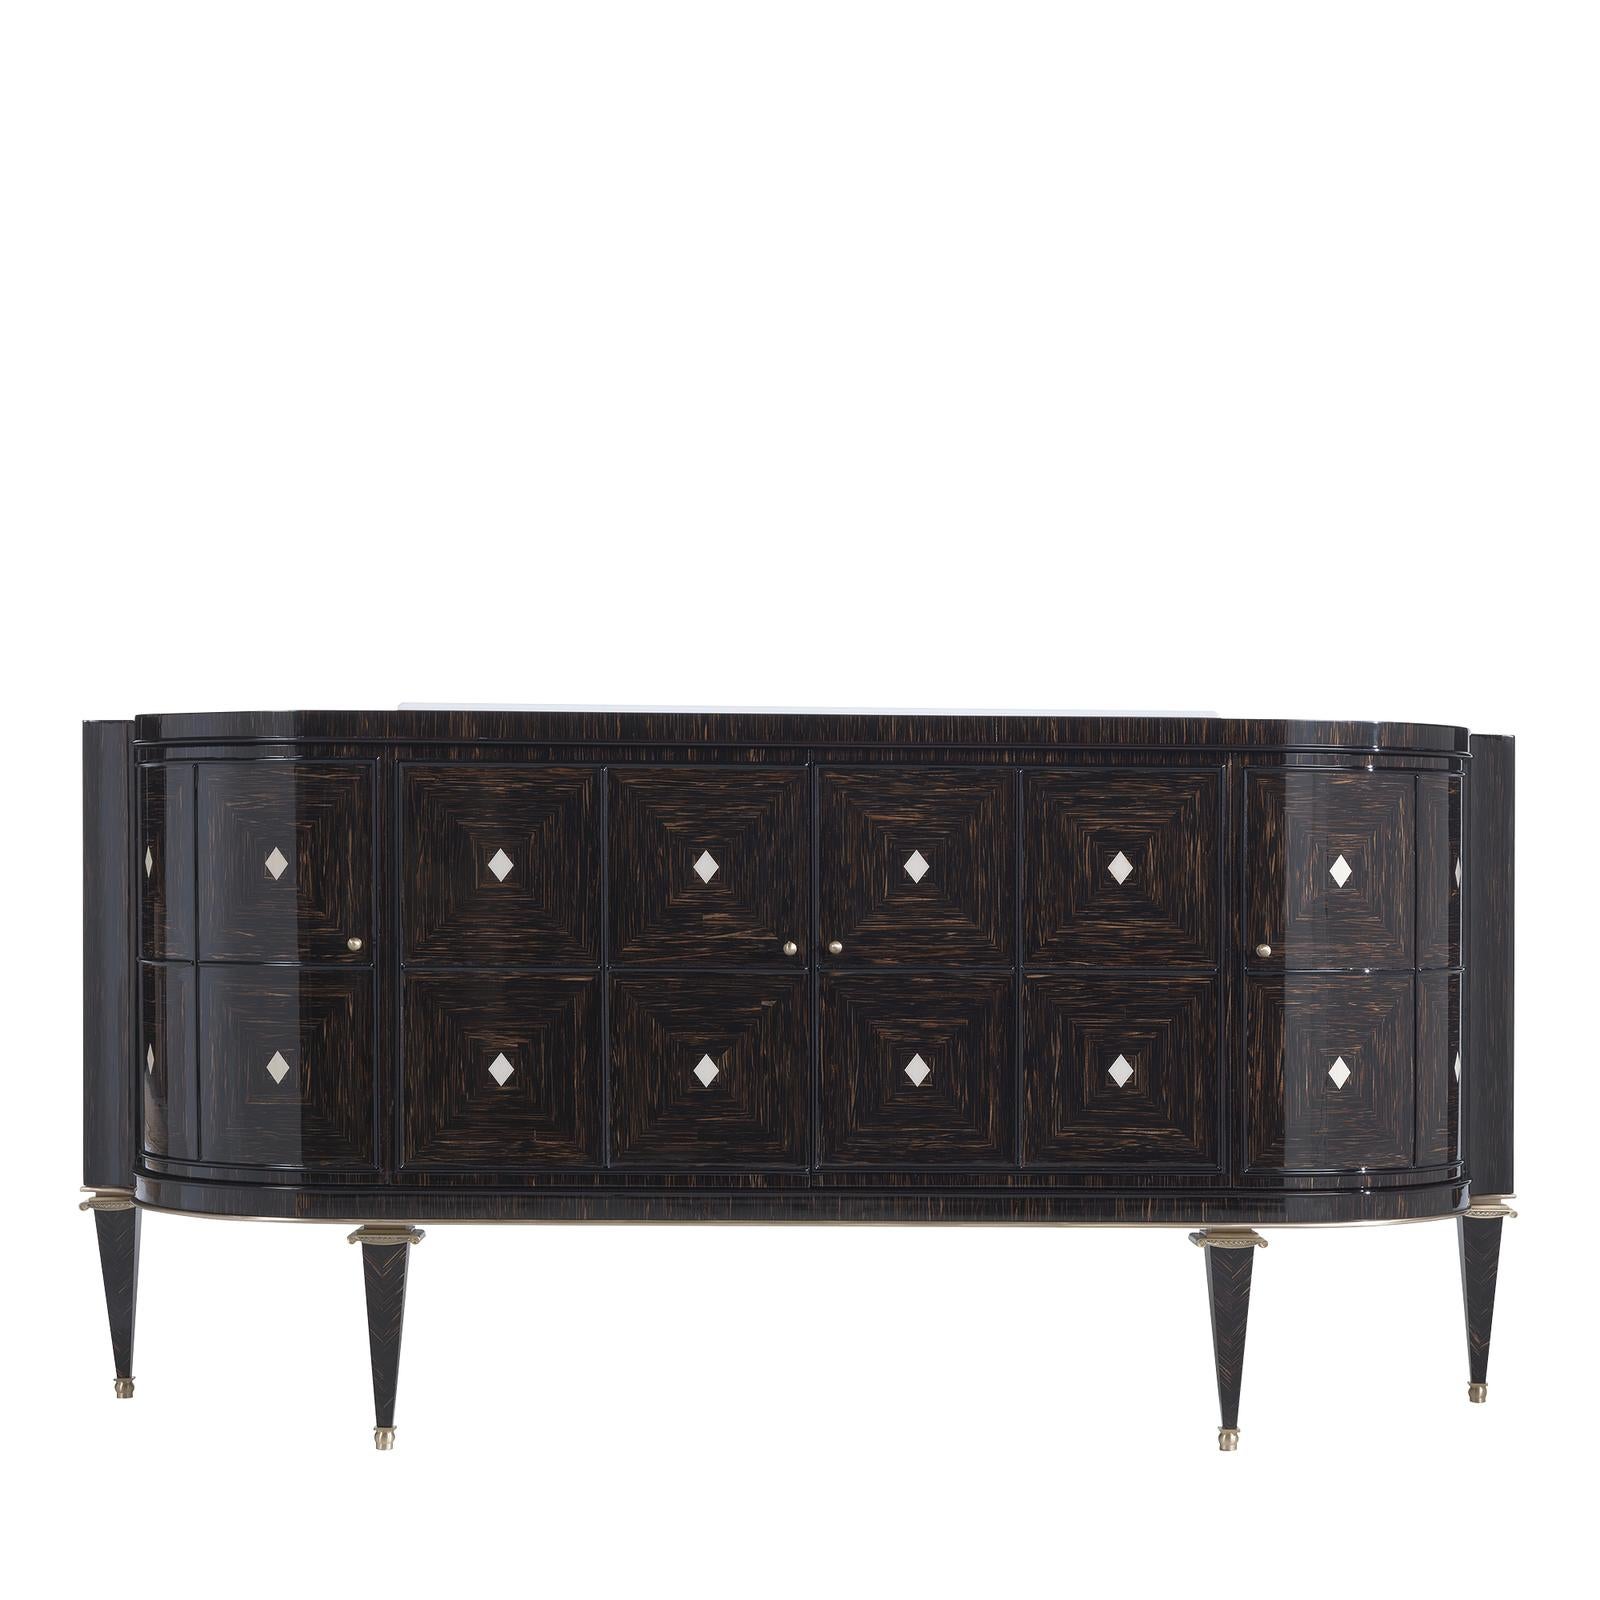 Standing tall on four tapered legs, this stately sideboard exemplifies a distinguished approach to modern, functional design. Crafted of solid palm wood, the streamlined demilune silhouette features two central doors flanked by two side doors